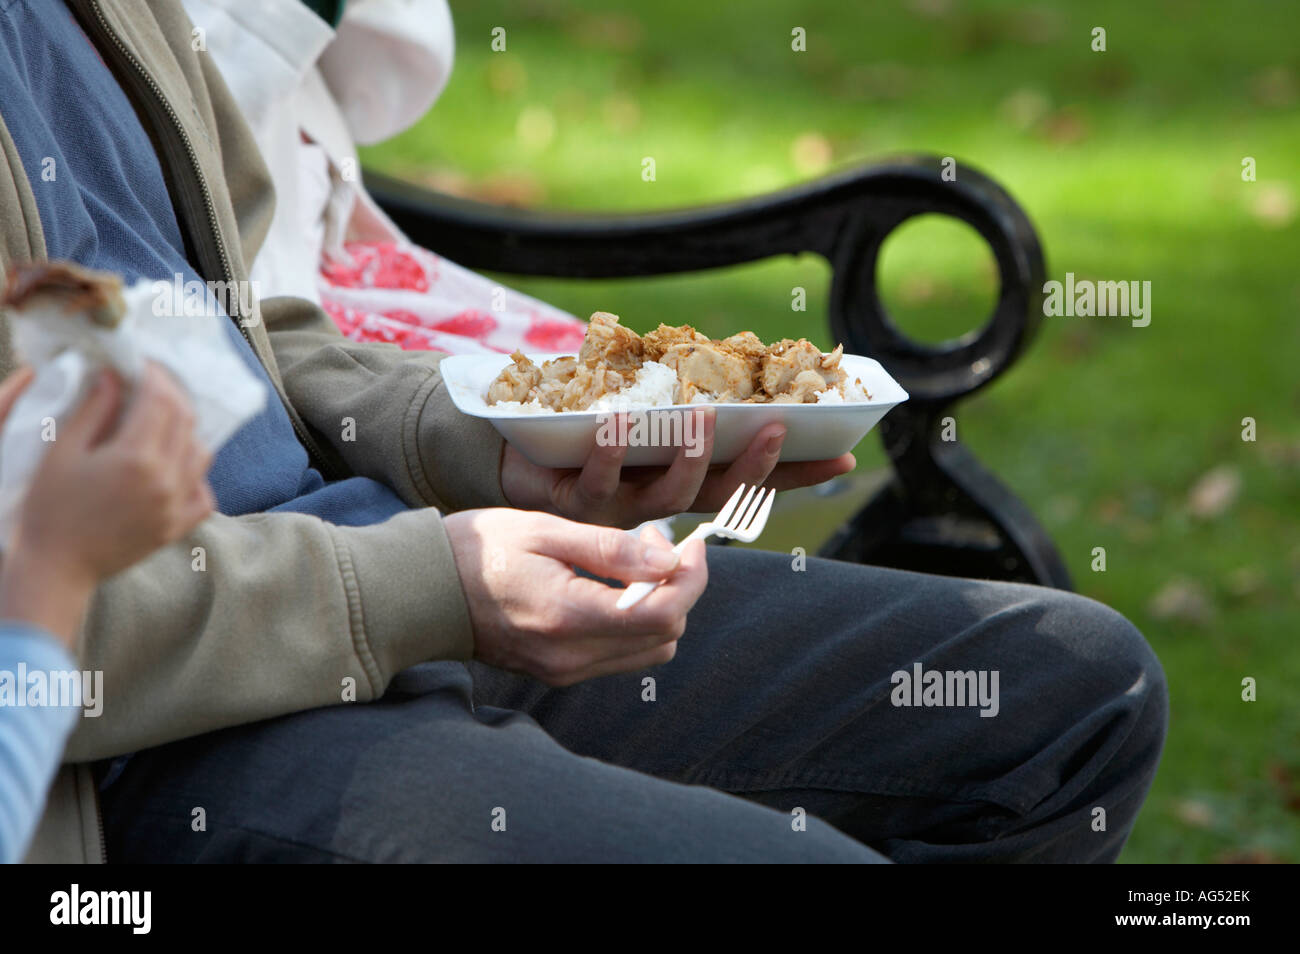 close up of father sitting with two children eating take away chinese meal and crepes outdoors on a park bench Stock Photo